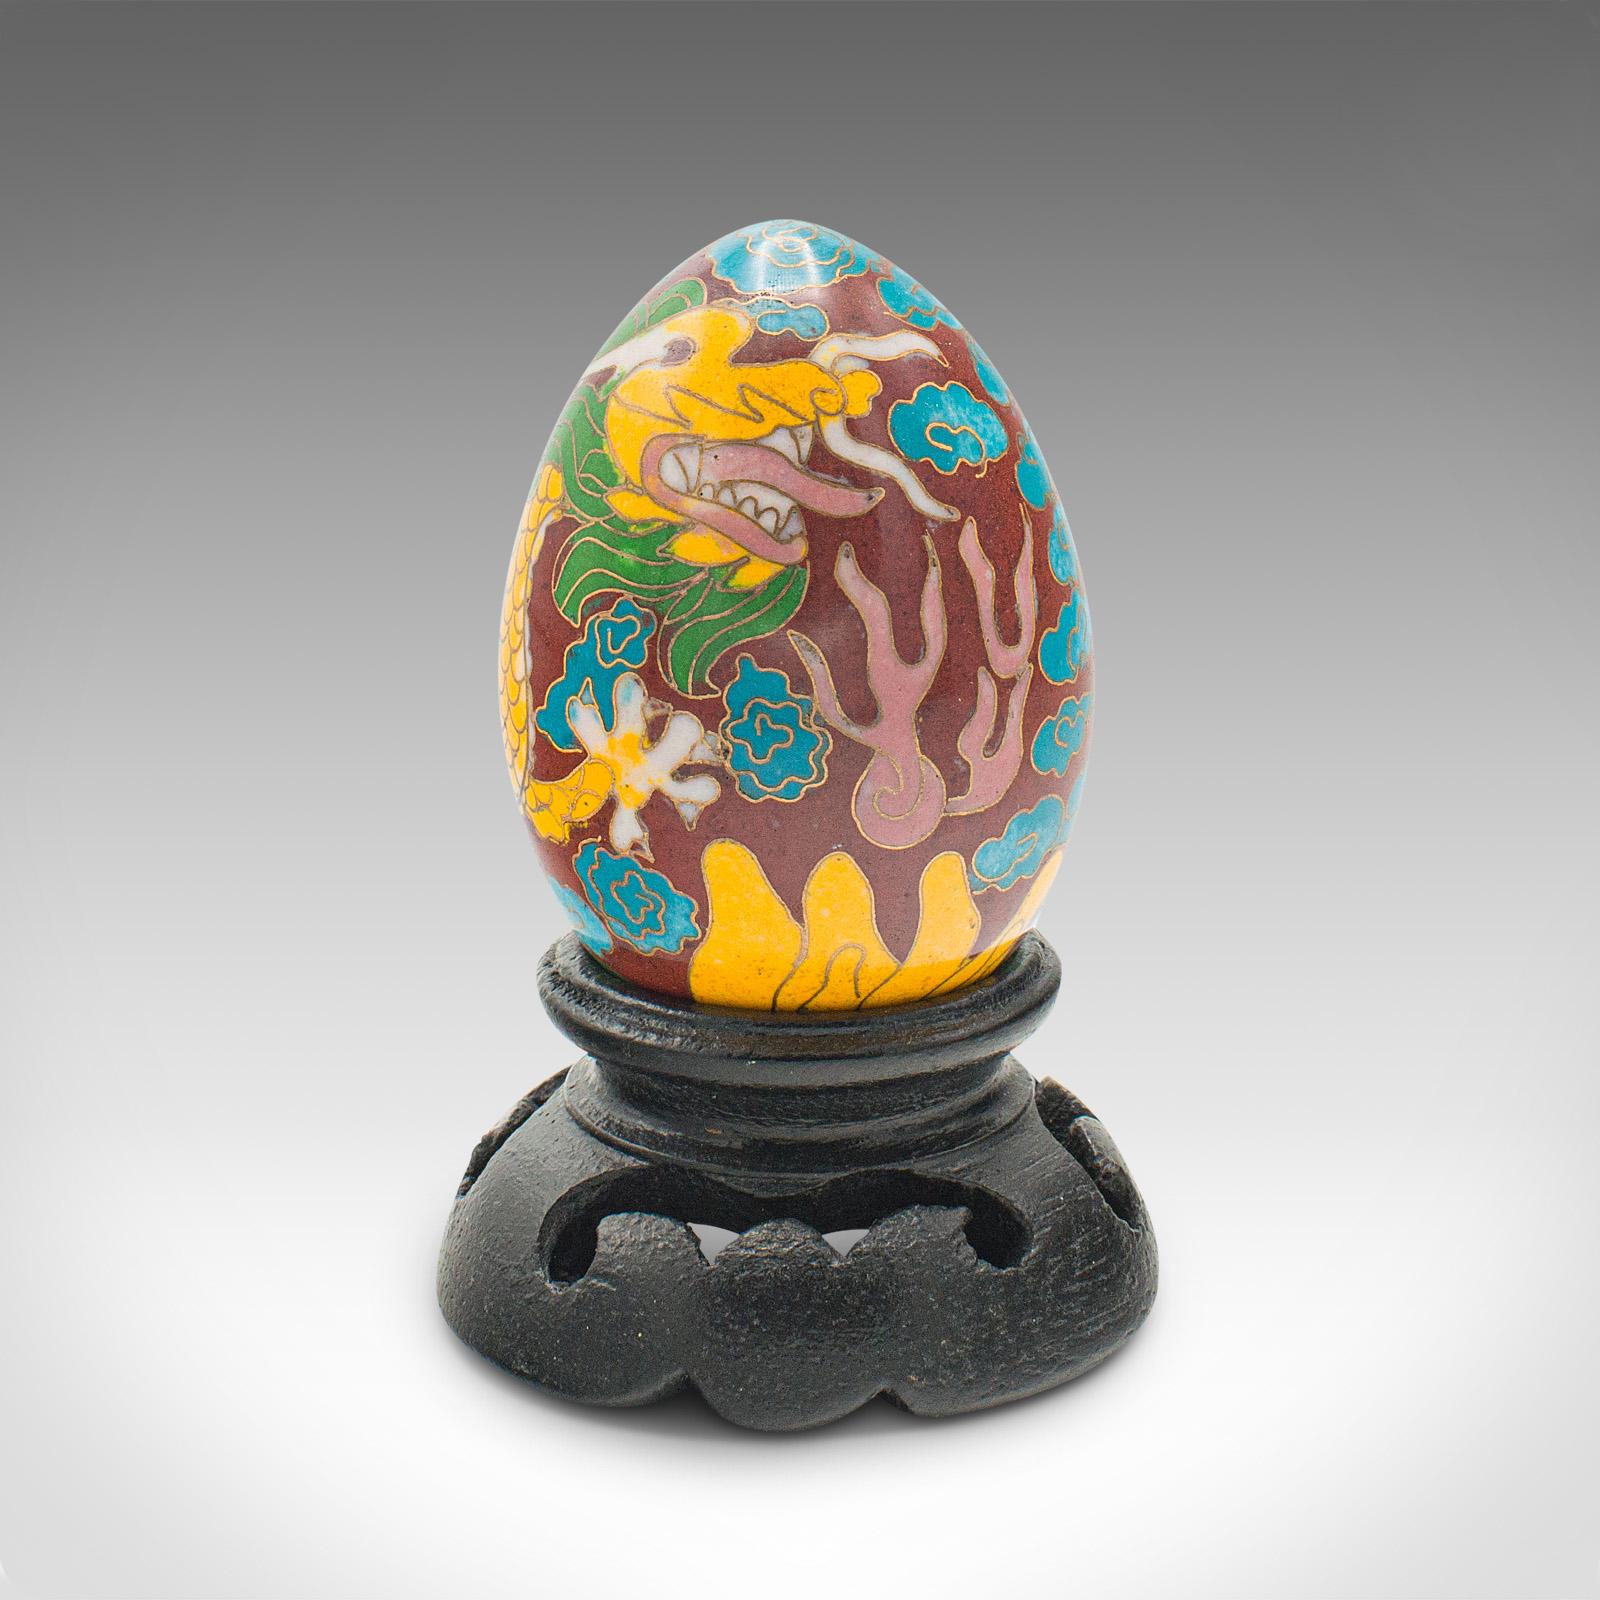 This is a small vintage cloisonné decorative egg. A Chinese, enamelled ornament on ebonised display stand, dating to the late 20th century, circa 1970.

Colourful decorative egg with charming dragon decor
Displays a desirable aged patina and in